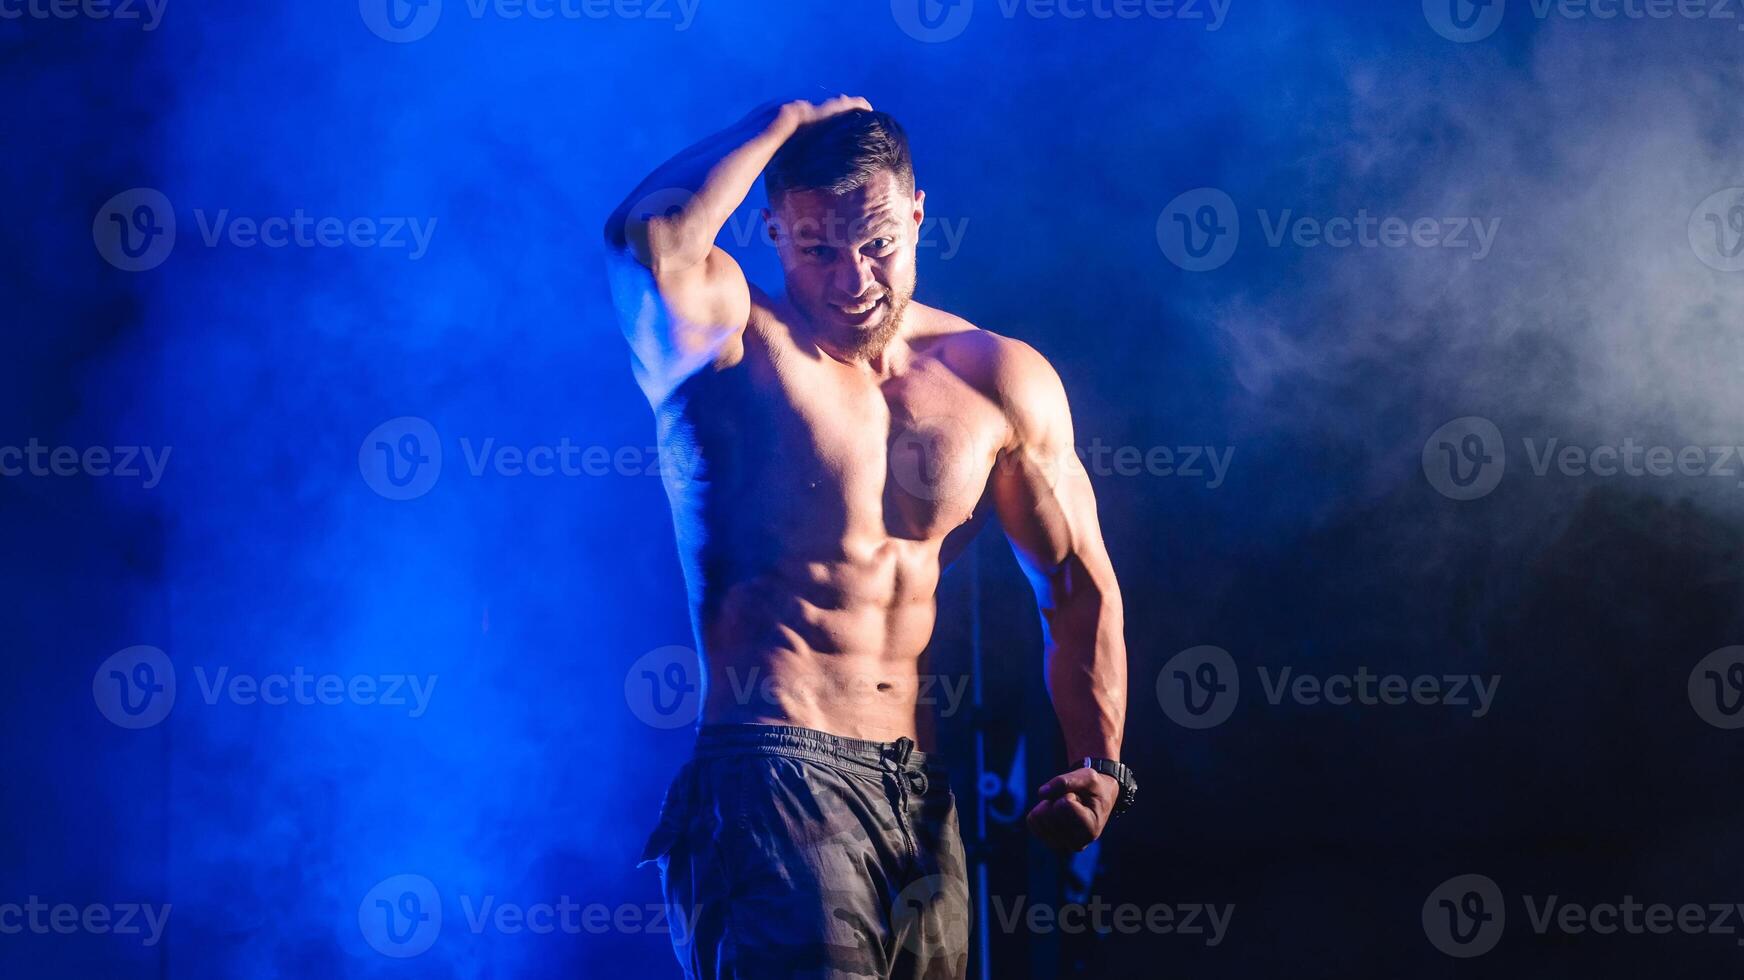 Bodybuilder showing belly and biceps muscles. Strong man flexing muscles. Fitness model posing at camera. Black and blue light background. Athlete looking straight at camera photo